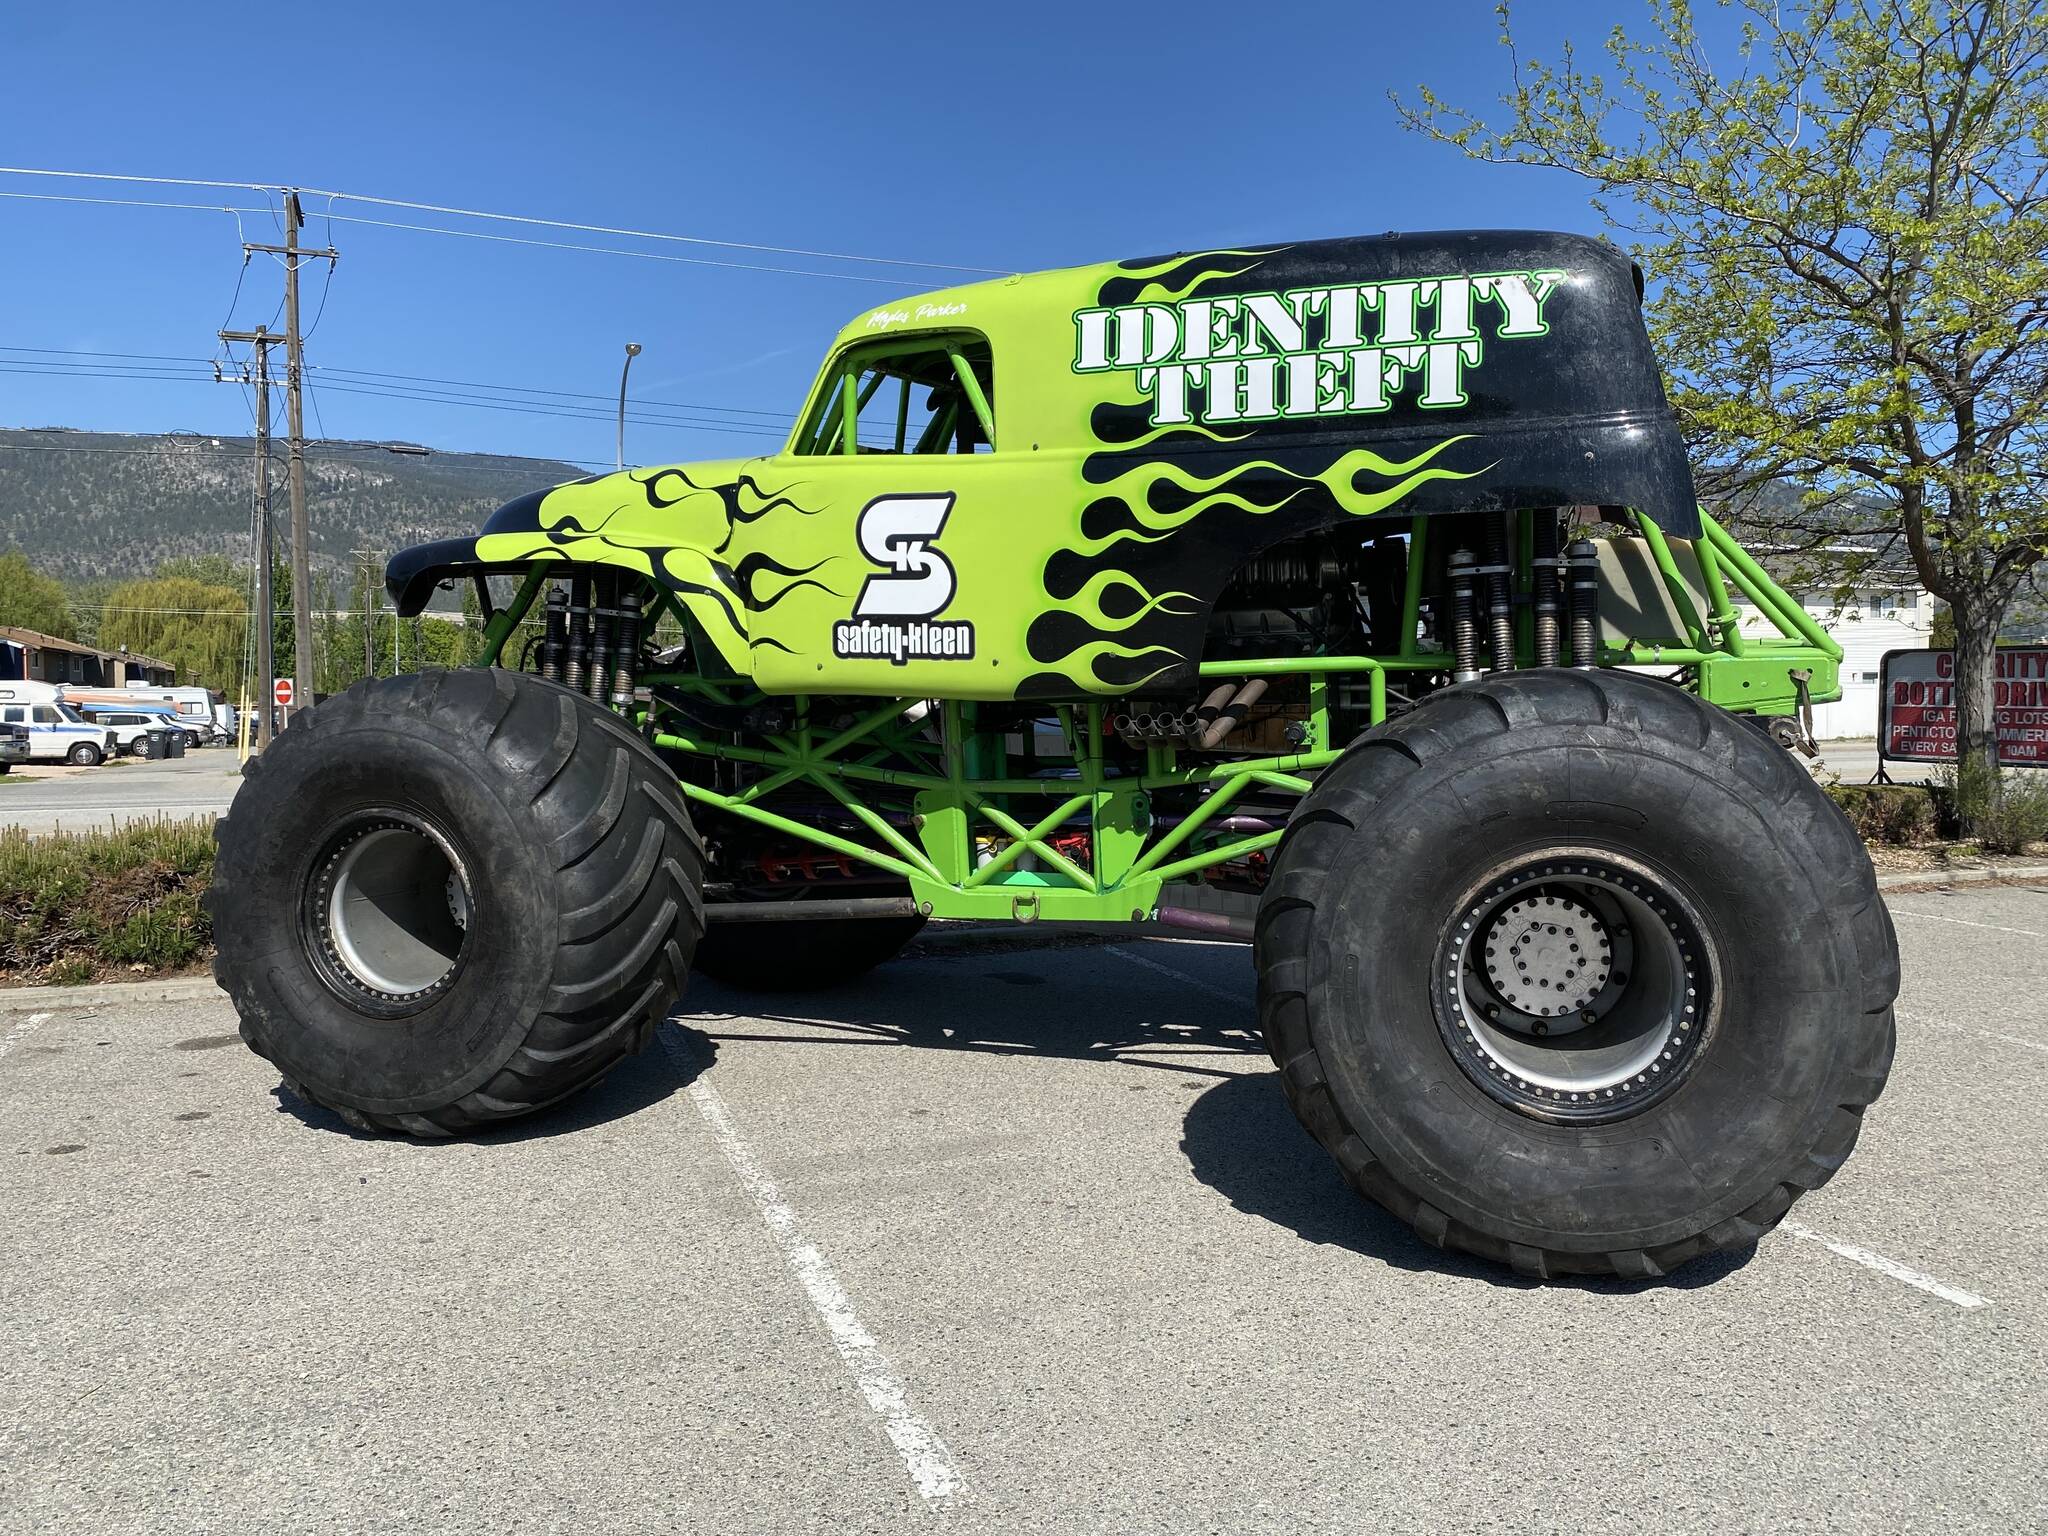 Look what's back in town: 'Malicious' monster trucks on display in  Penticton - Keremeos Review